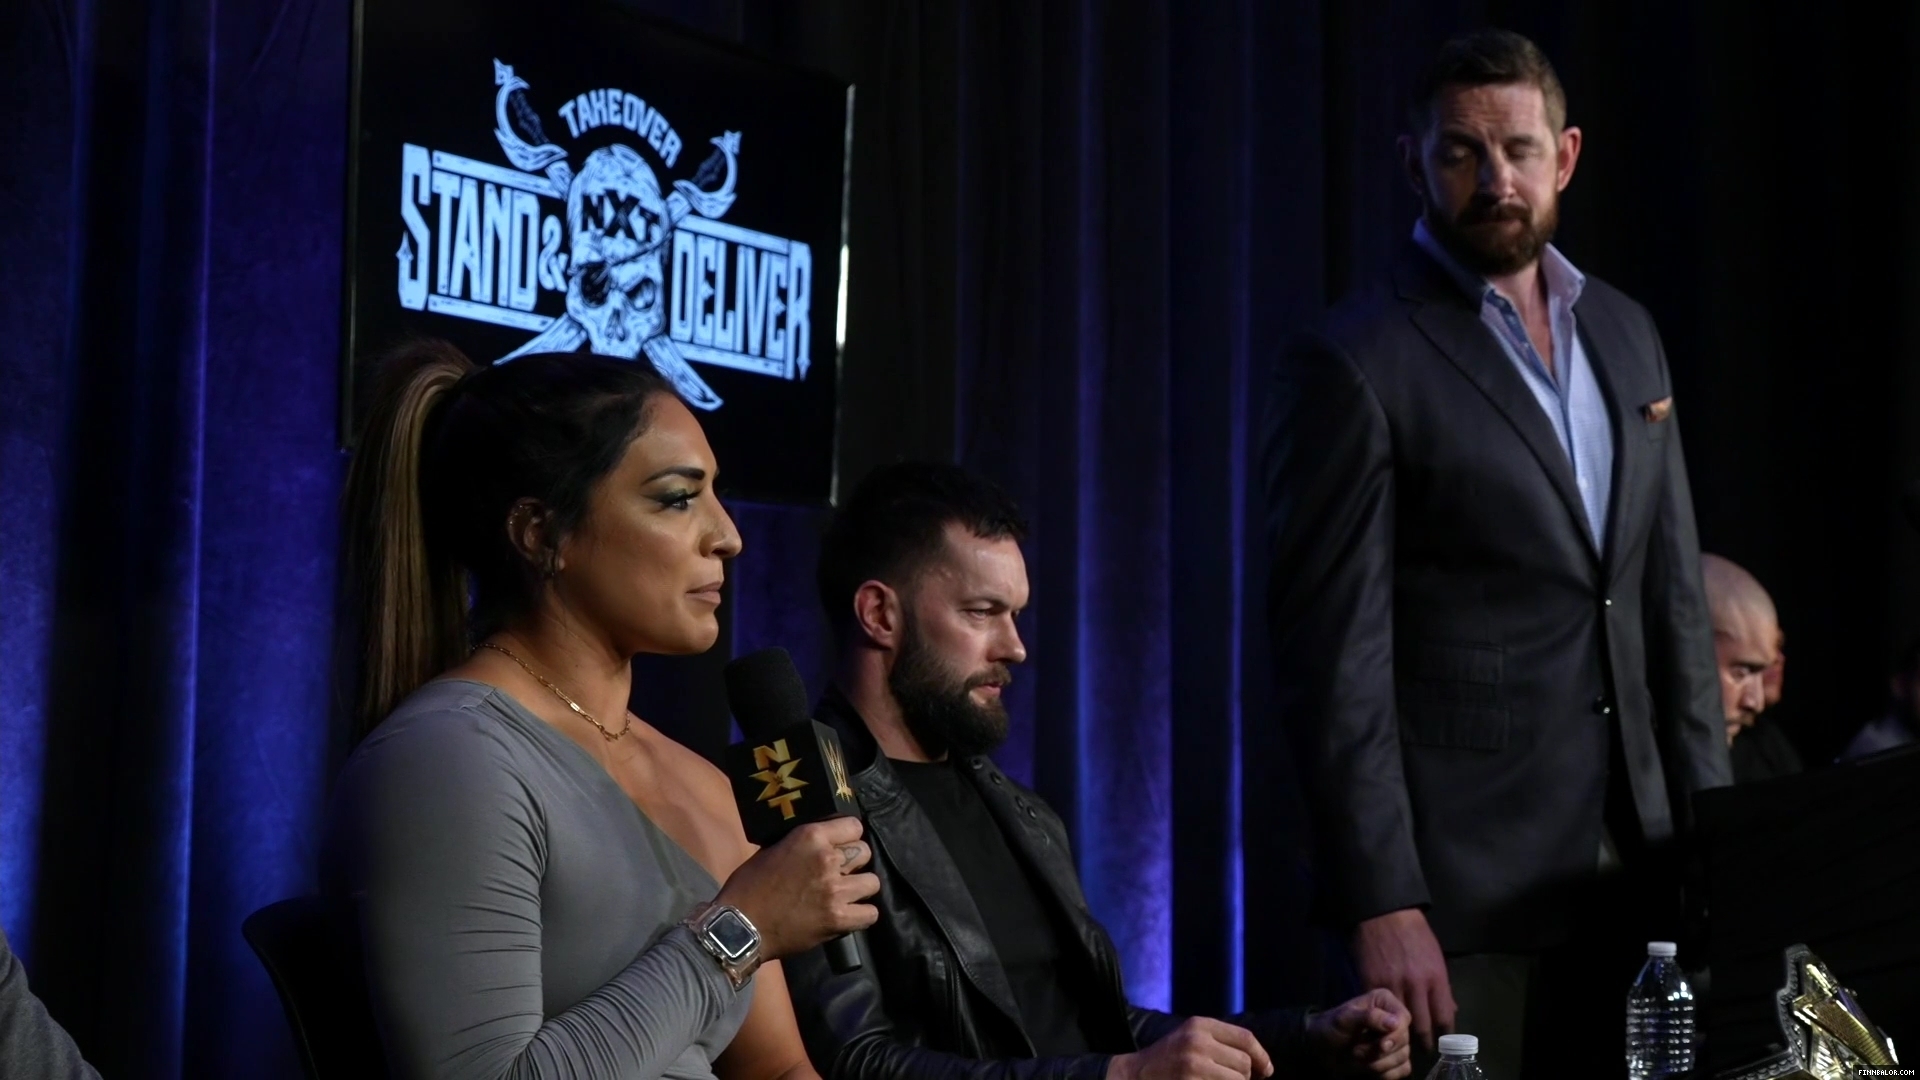 WWE_NXT_TakeOver_Stand_and_Deliver_2021_Global_Press_Conference_1080p_WEB_h264-HEEL_mp41965.jpg